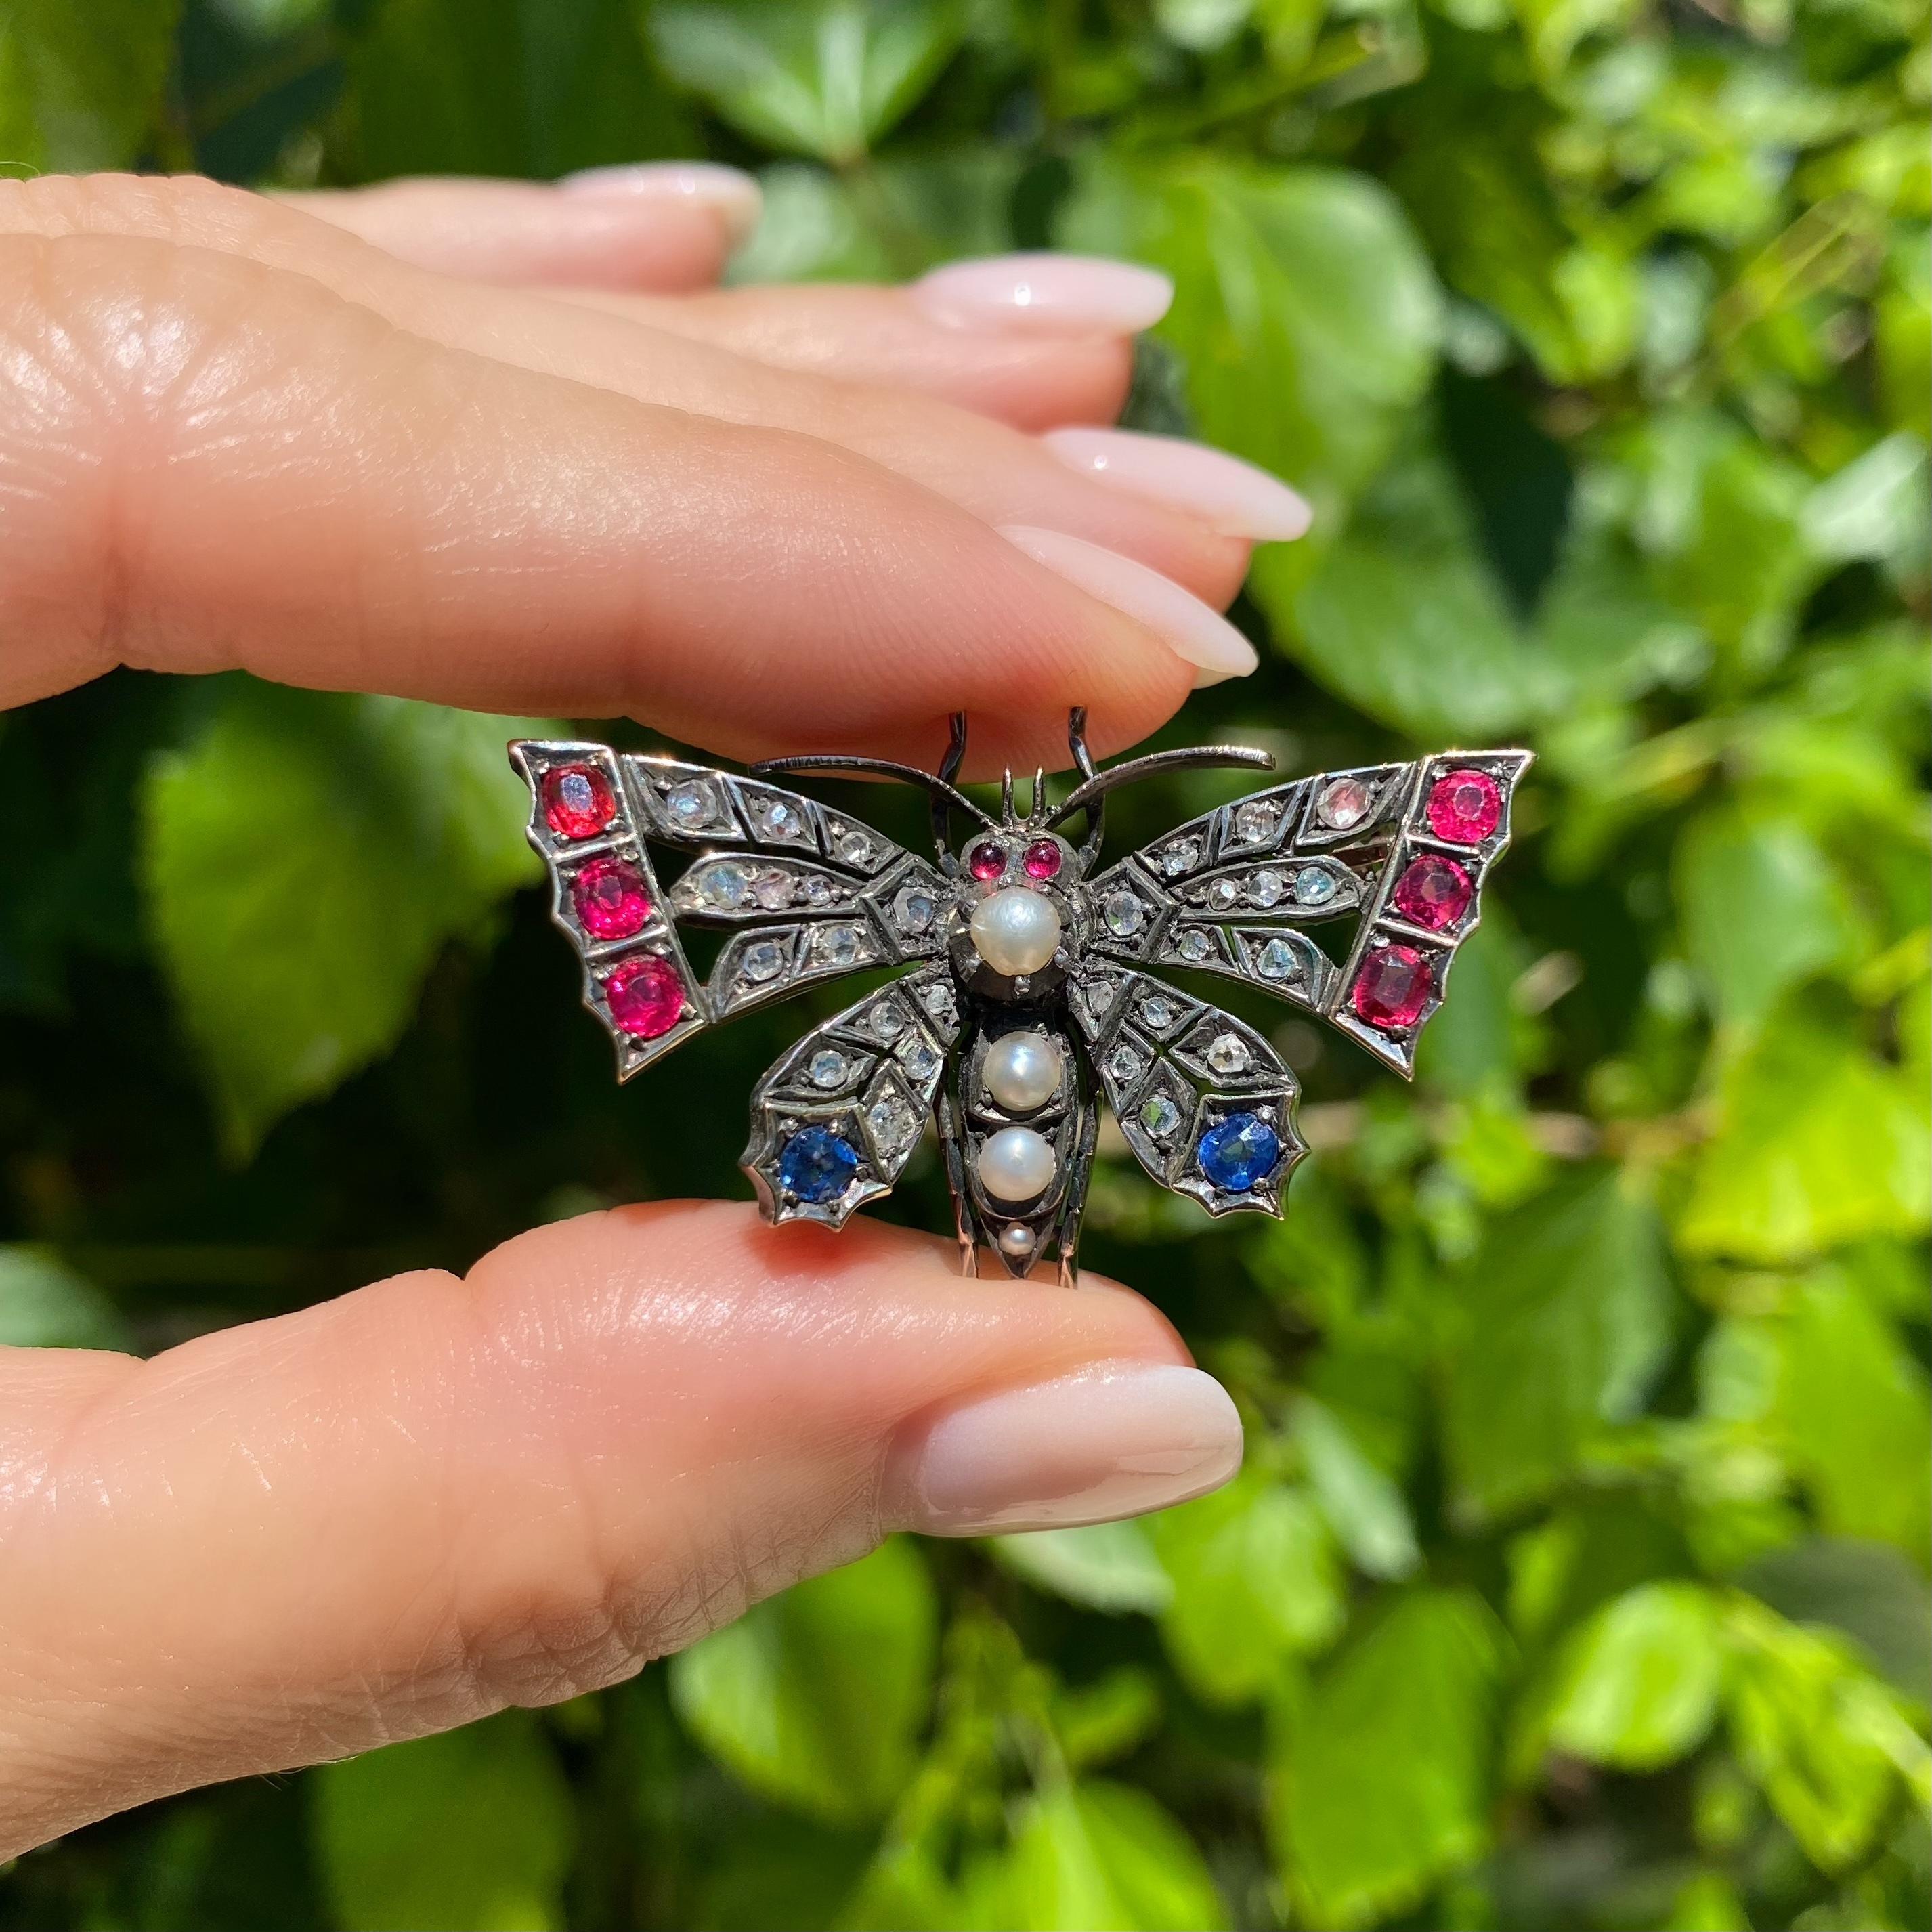 A Wonderful Sapphire Ruby Pearl and Diamond Butterfly Brooch set with 28 Rose cut Diamonds approx. 0.35tcw, Pearls Sapphires and Simulated Rubies. Hand crafted in Silver on 14K Yellow Gold. Measuring approx. 1.66